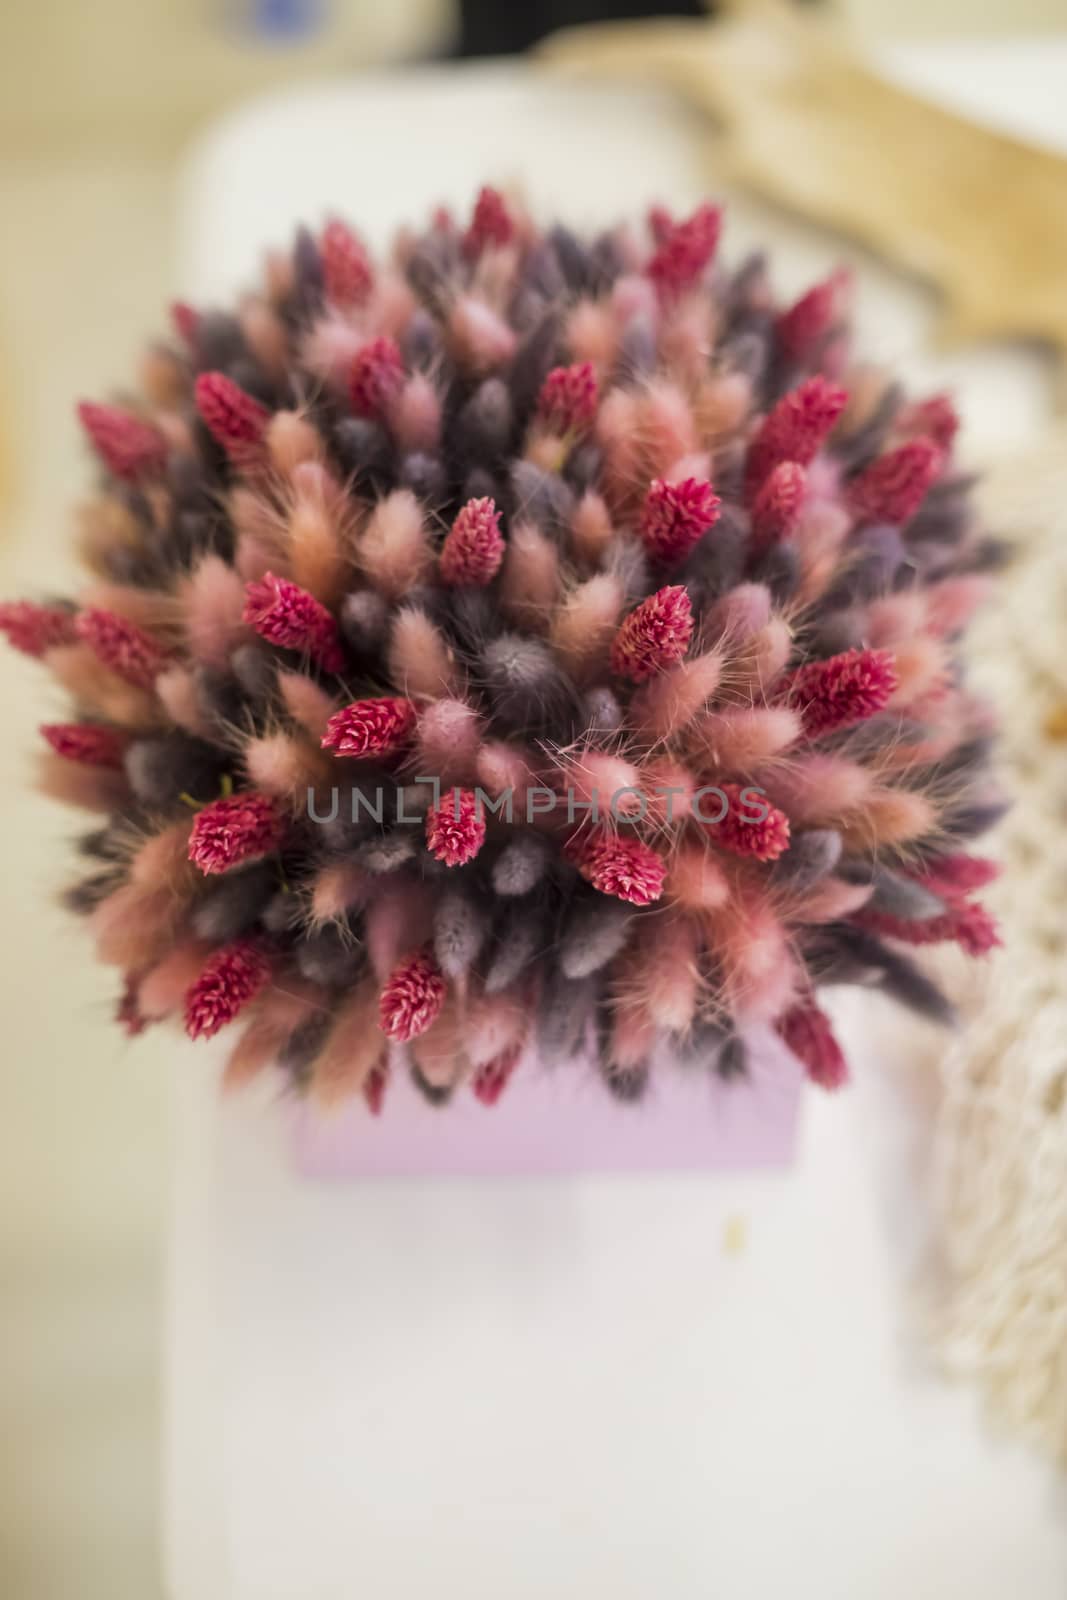 Panicles of dried cereal flowers painted in pink and burgundy colors by galinasharapova